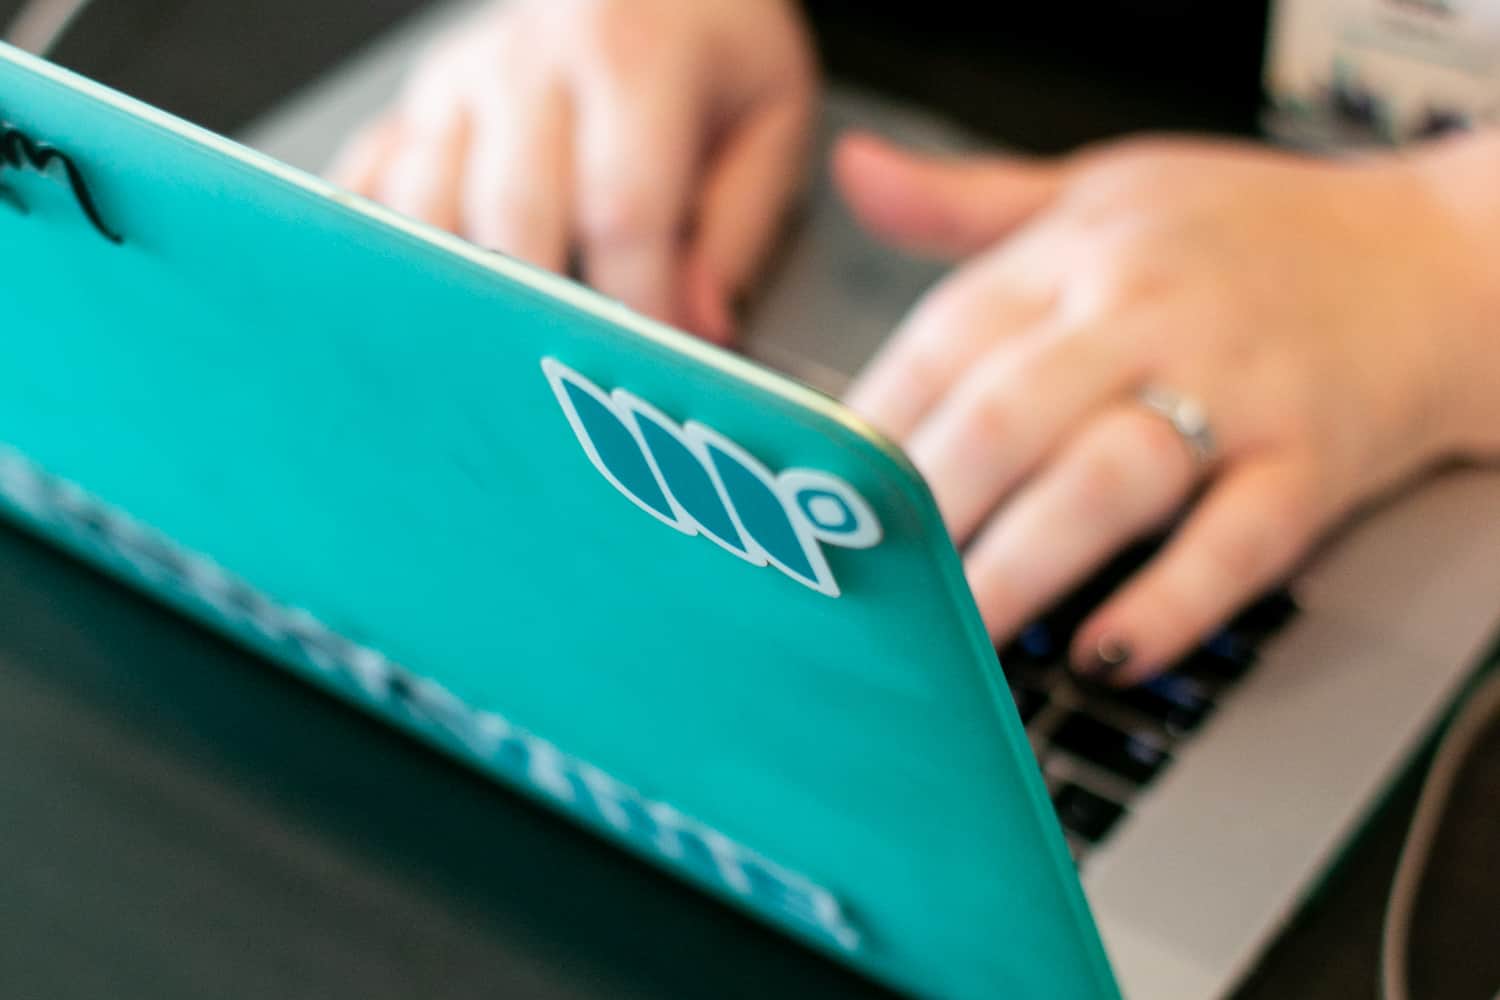 someone typing on laptop with a teal cover and mediavine stickers